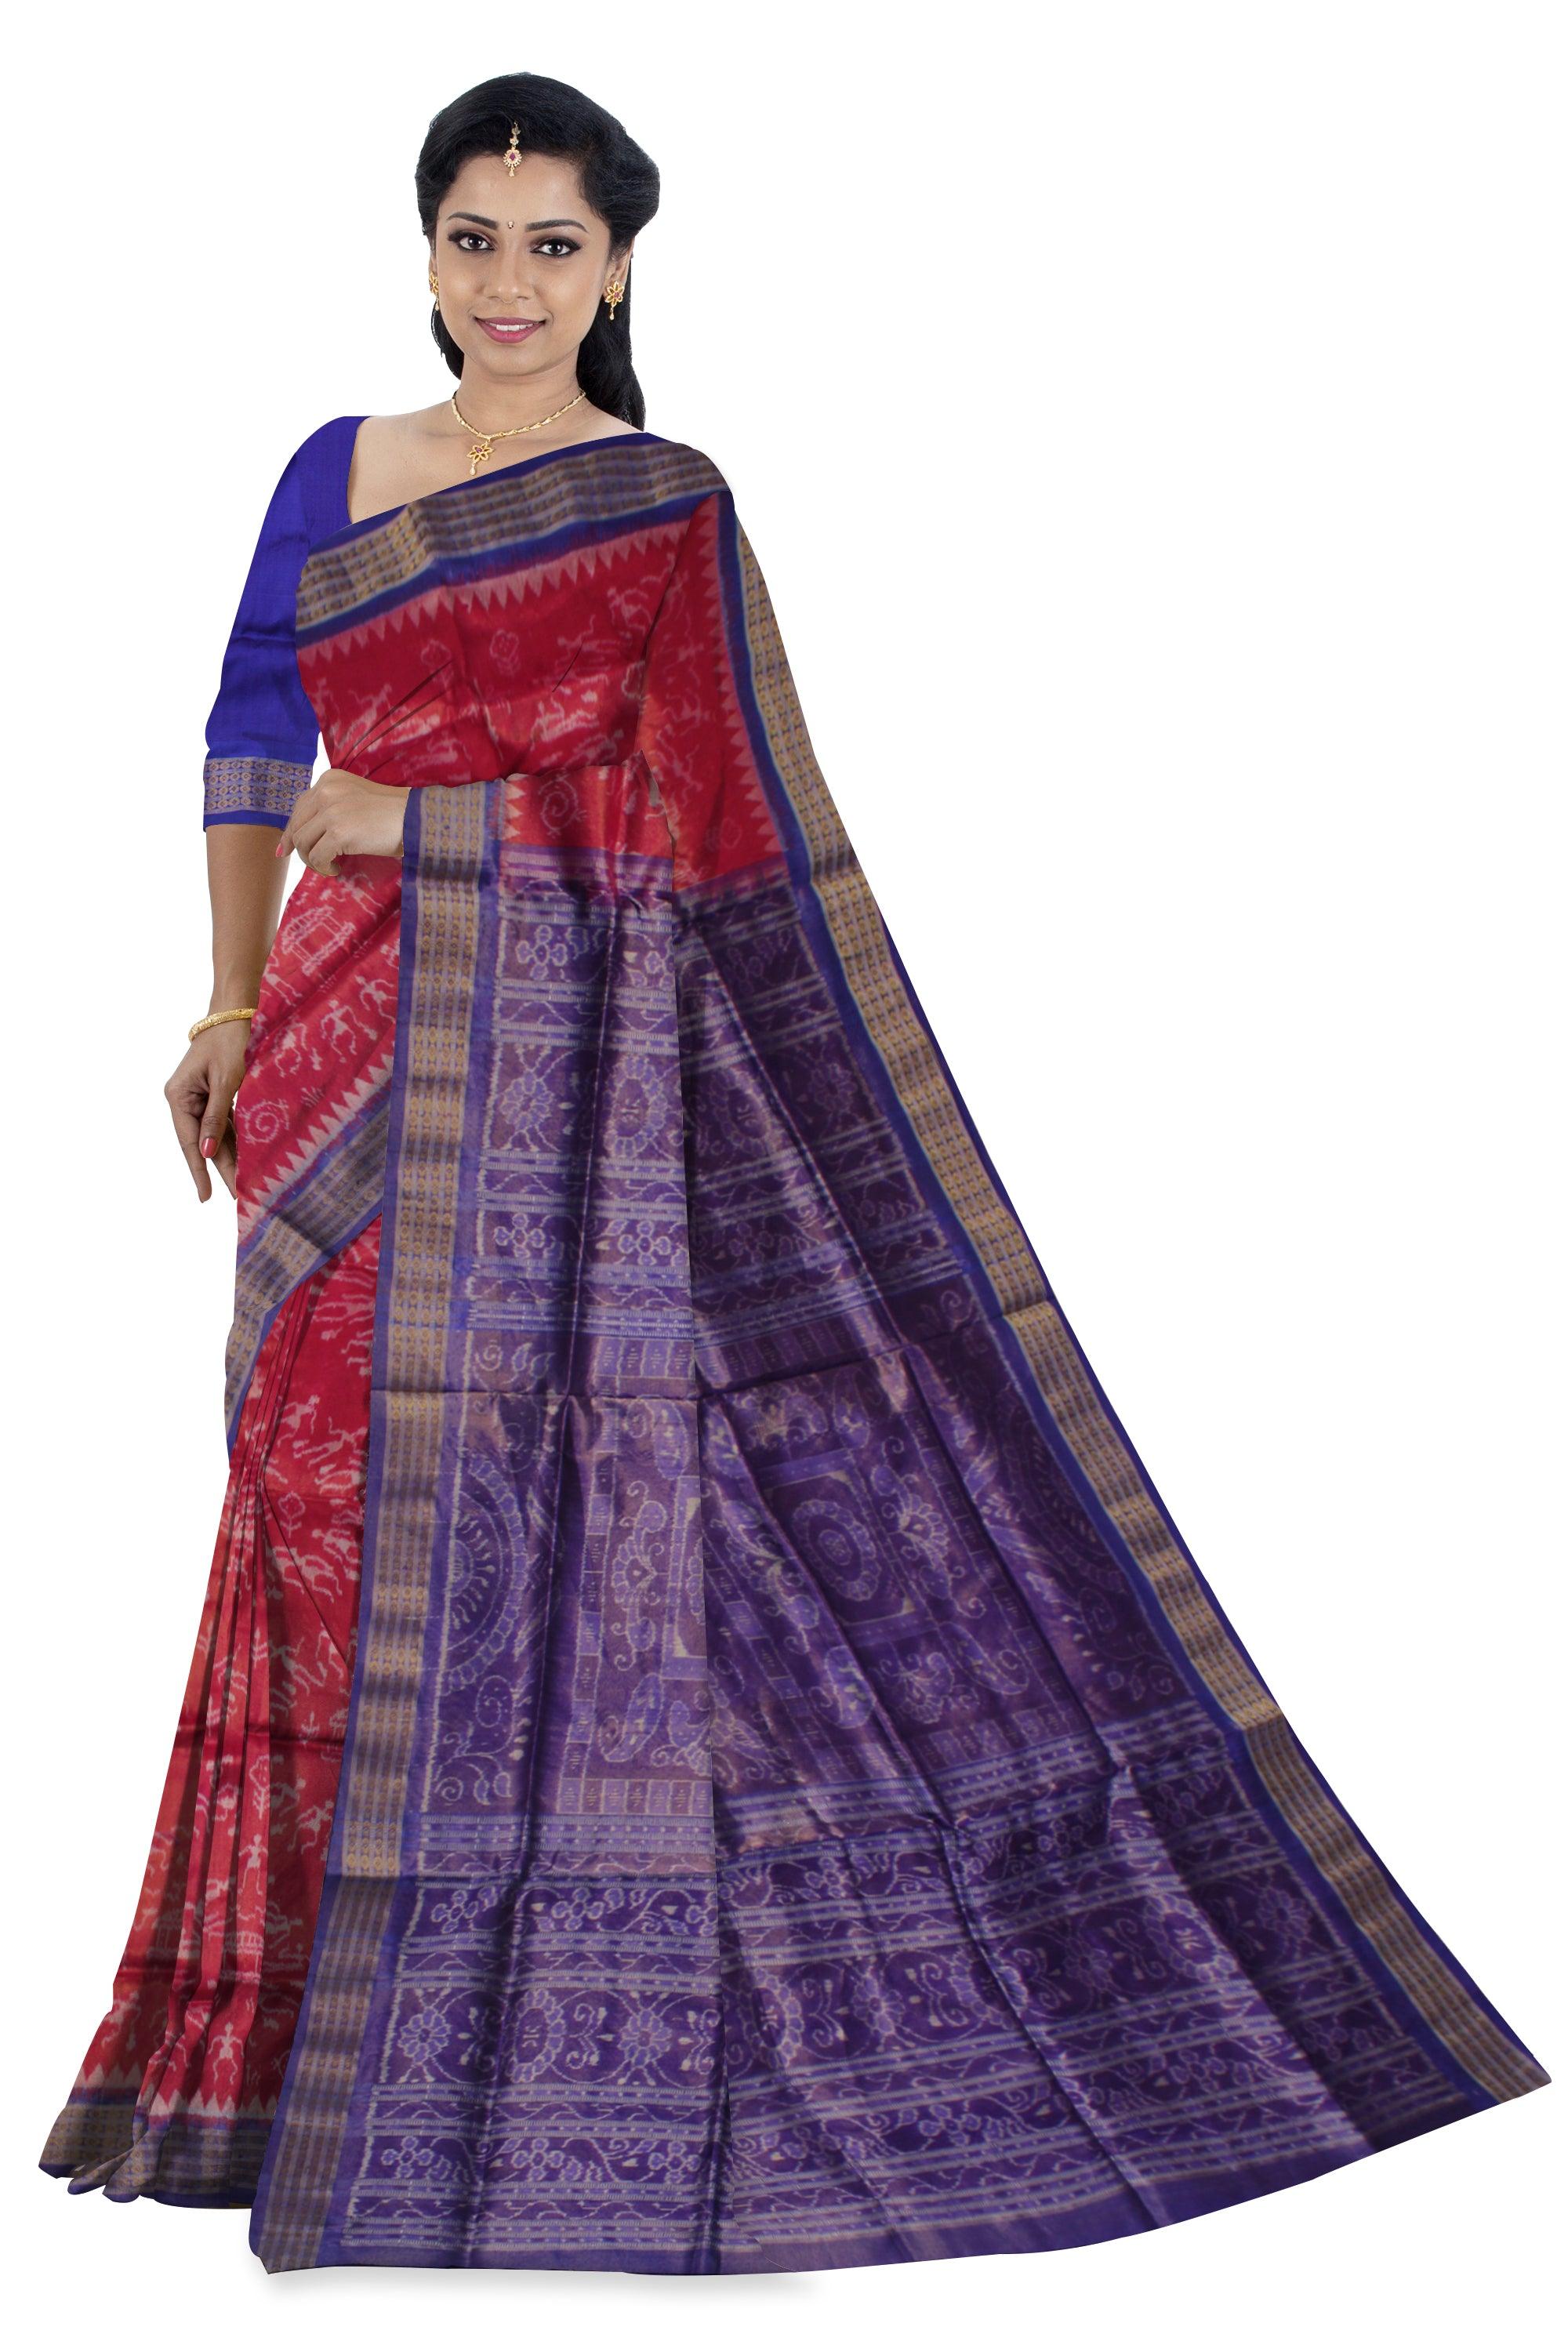 PANCHA KUTI TERRACOTTA PATTERN PURE TISSUE SILK SAREE IS CARMINE AND BLUE COLOR BASE, AVAILABLE WITH MATCHING BLOUSE PIECE. - Koshali Arts & Crafts Enterprise